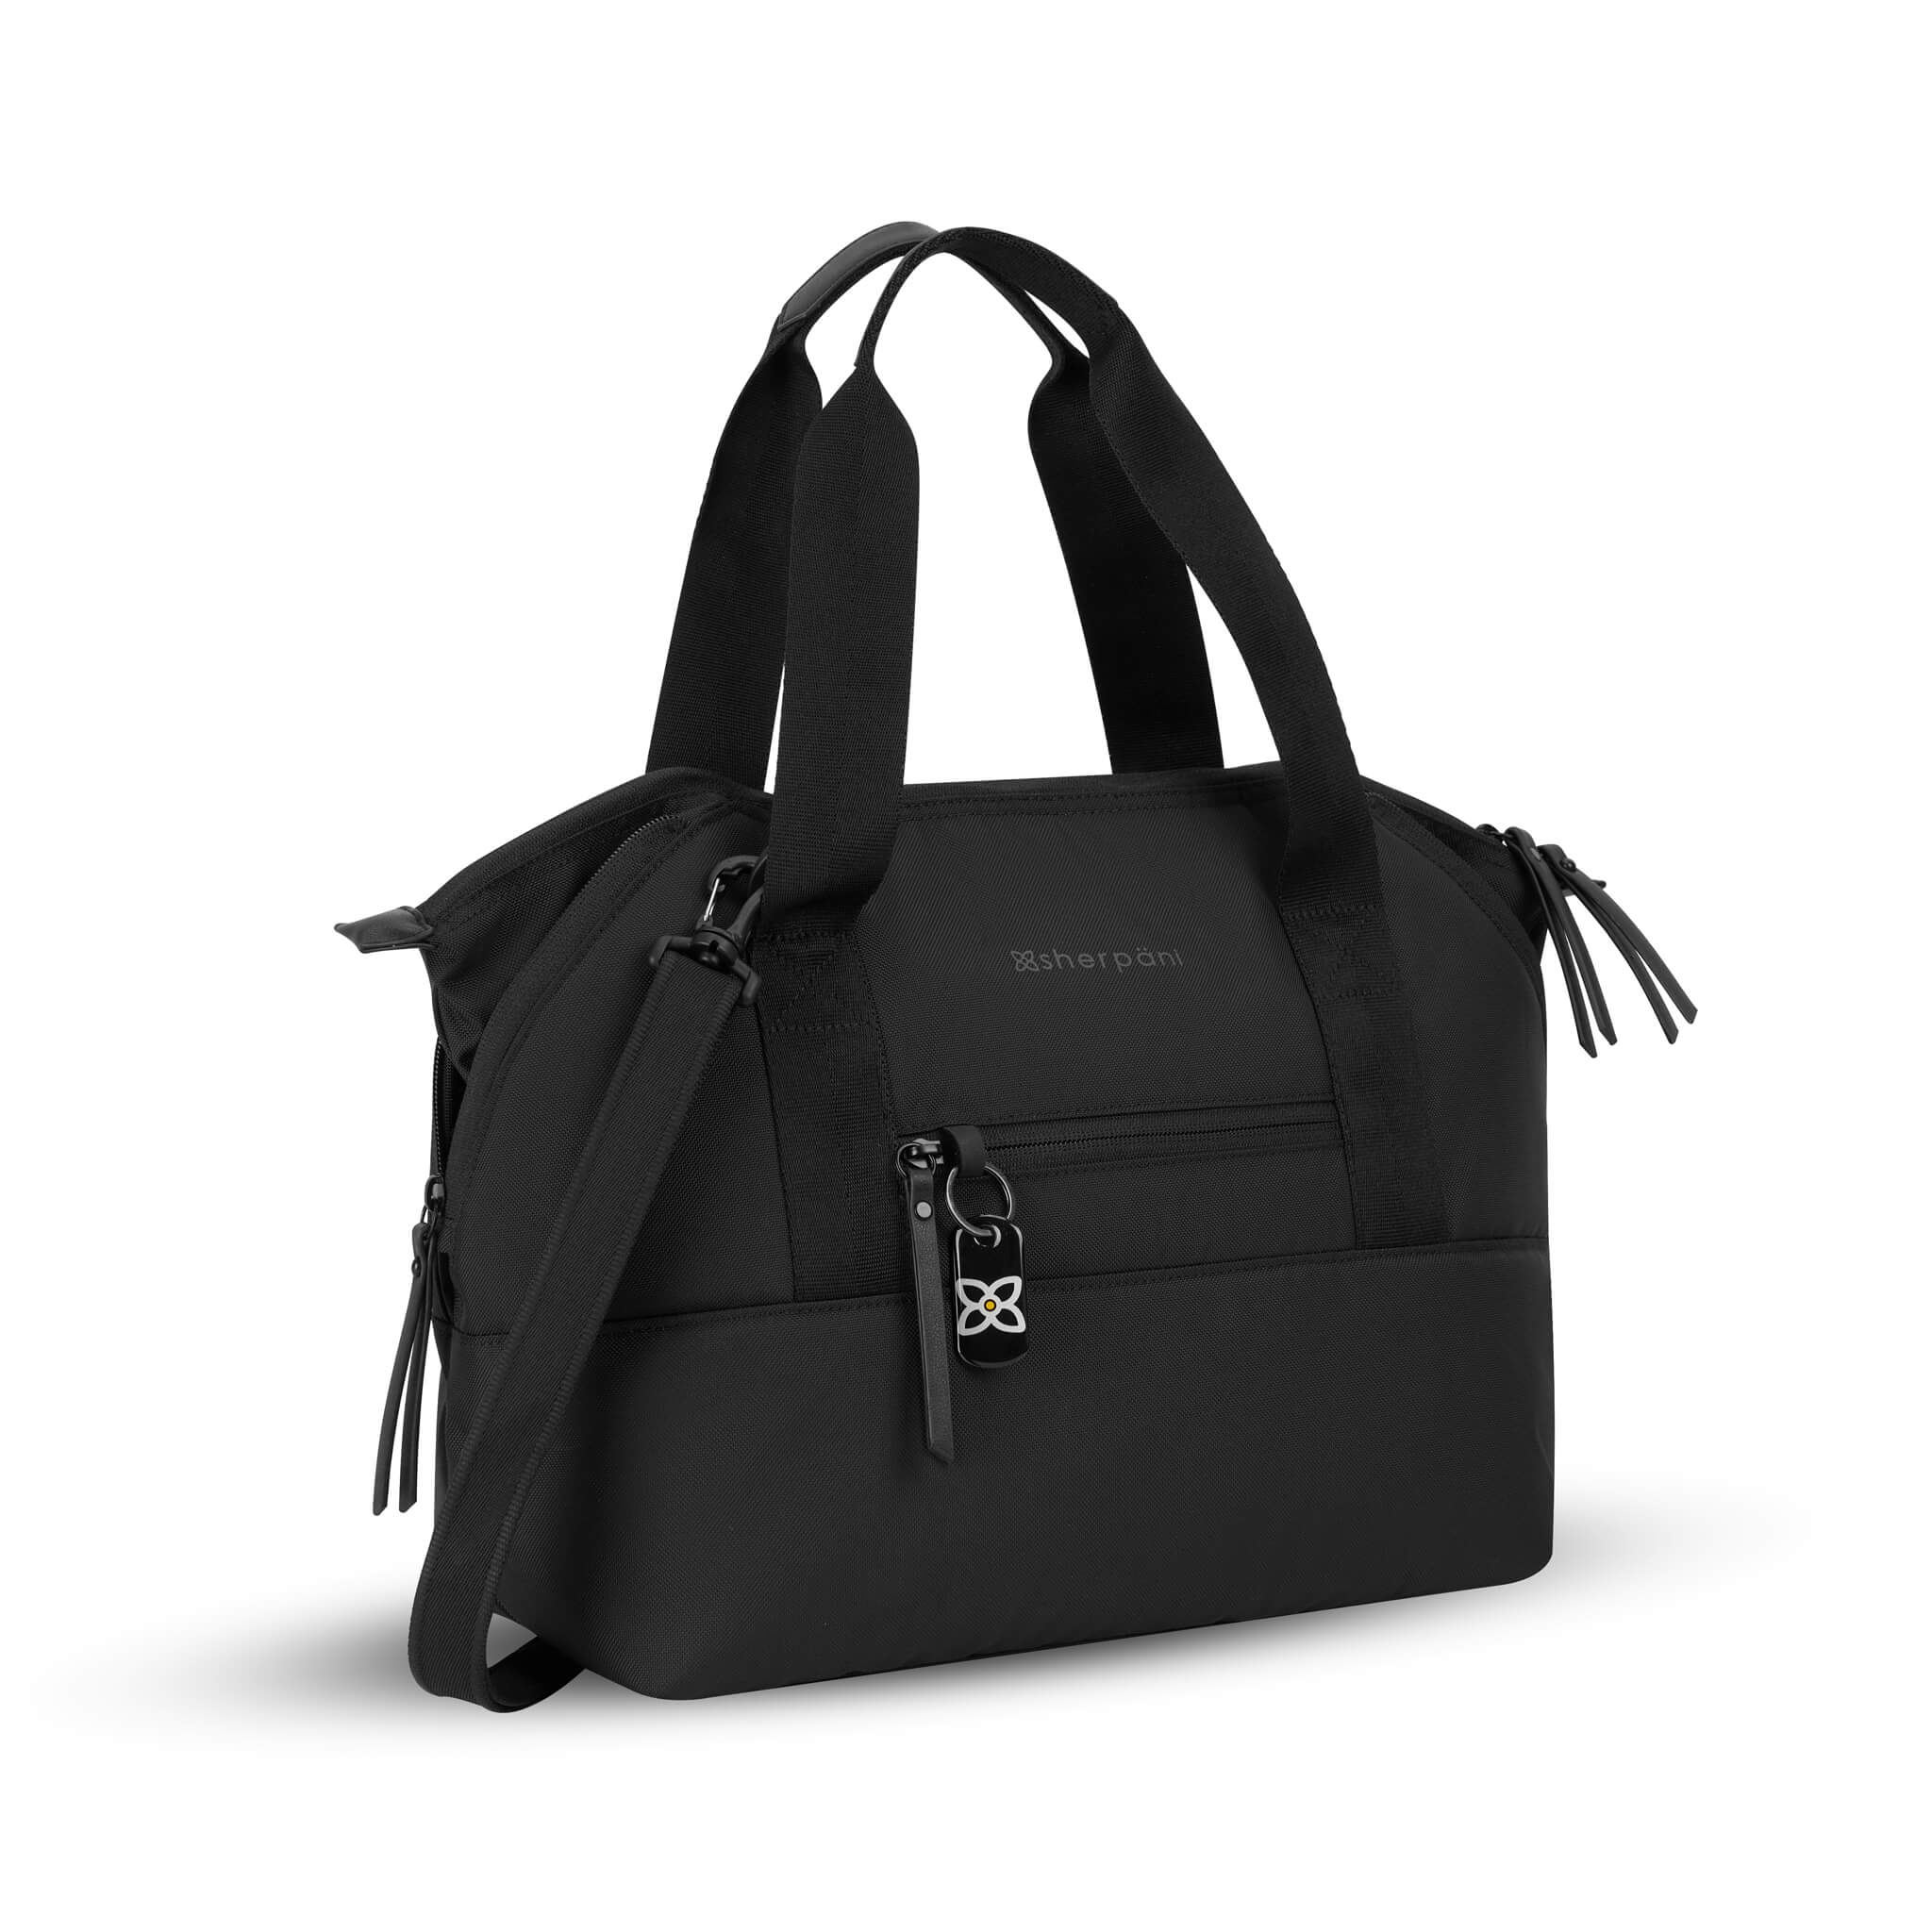 Front angled view of the Eclipse in Carbon (classic black). This travel tote features a zipper pocket in each corner which makes the Eclipse an expandable bag. This Anti-Theft purse is sustainably made from recycled materials including post consumer plastic and vegan leather. #color_carbon